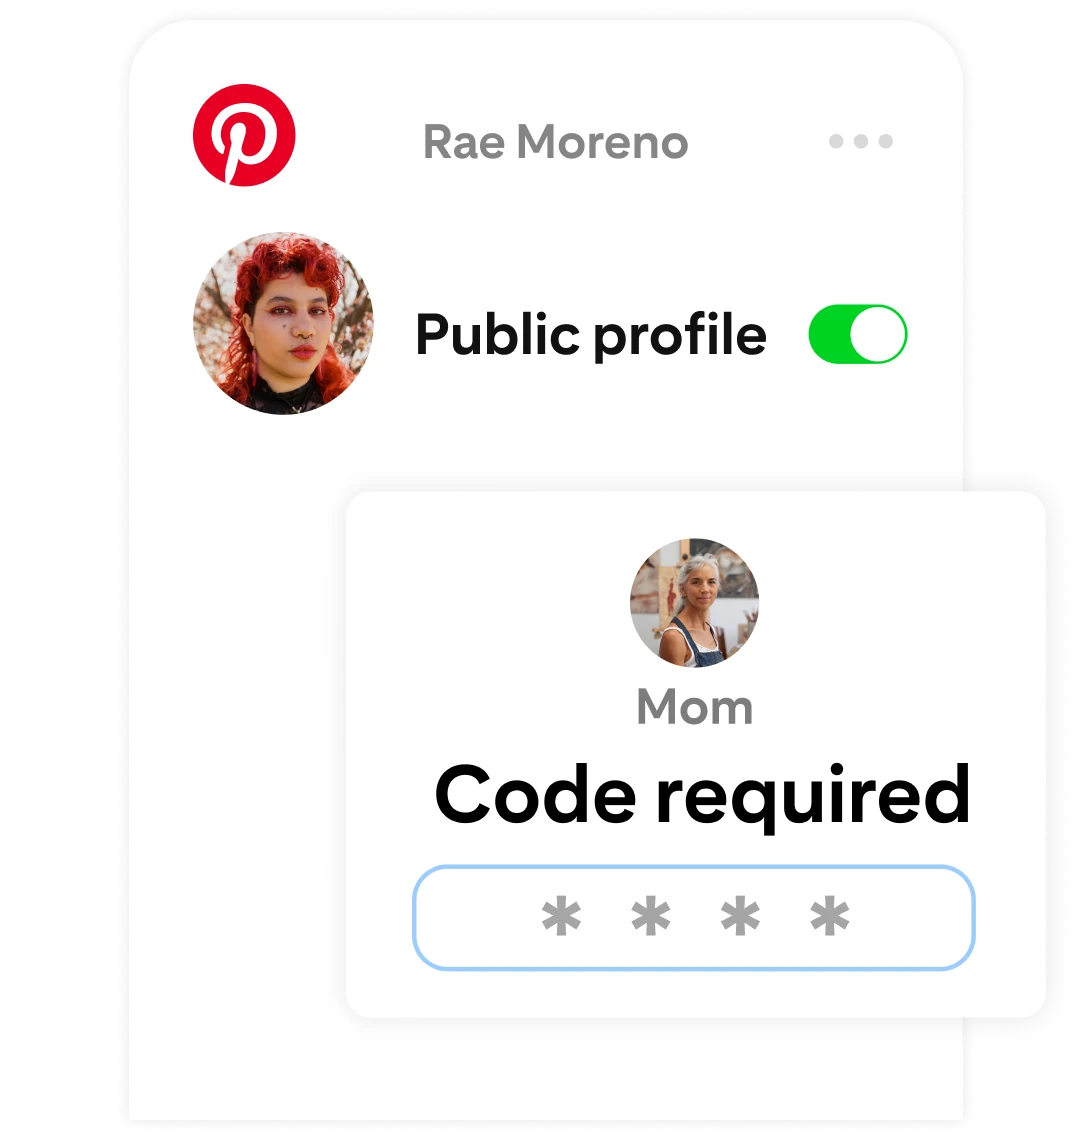 Rae Moreno's Pinterest settings page, where "Public profile" is now toggled on but requires a parent to enter a code to confirm the change.